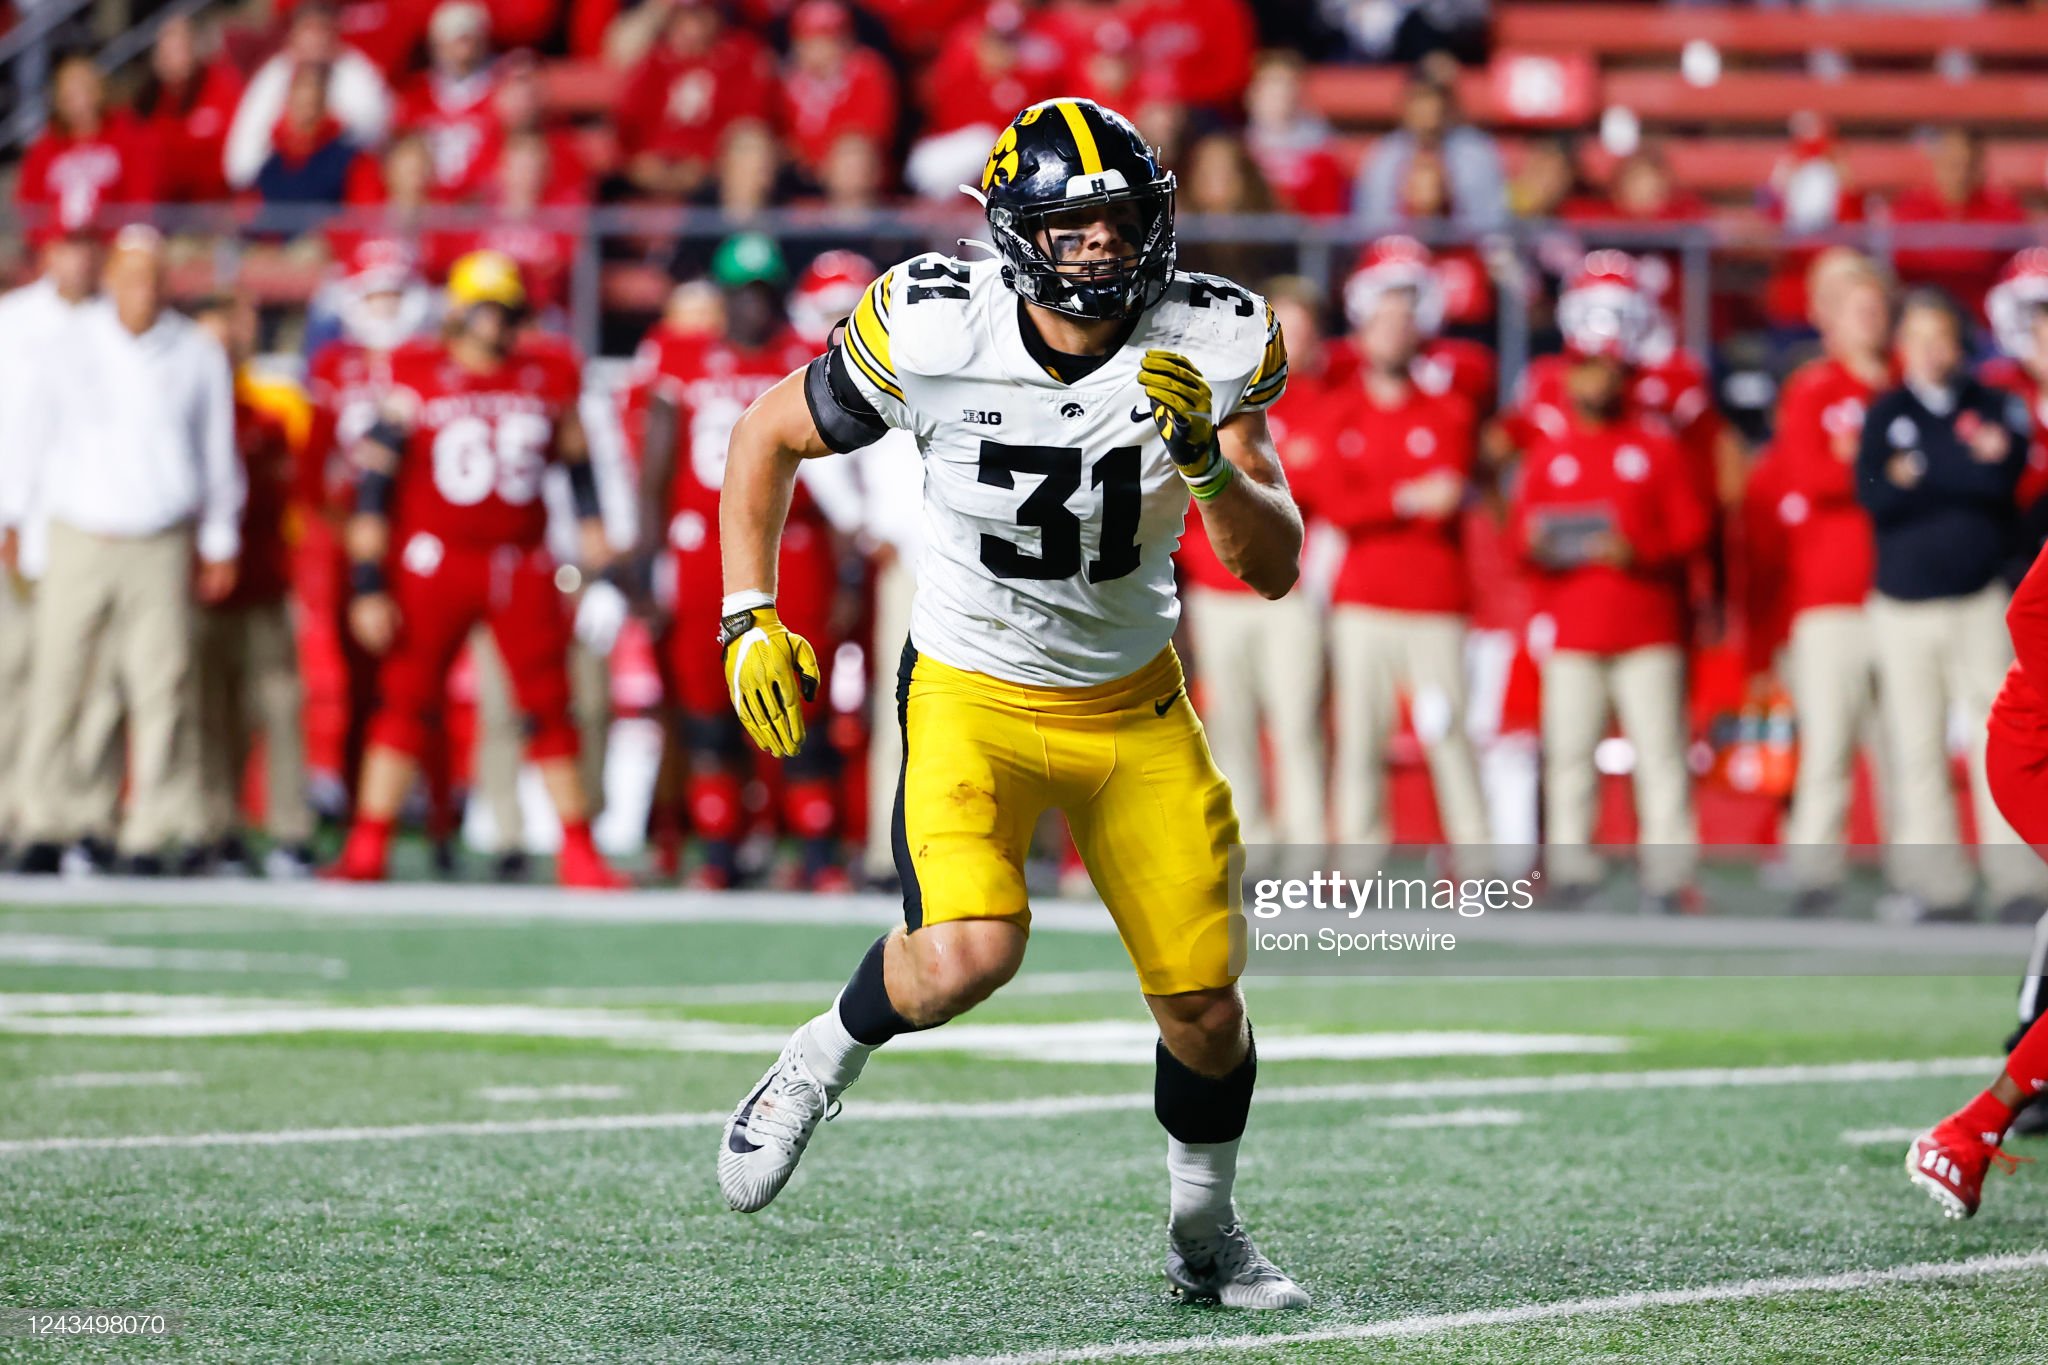 2023 NFL Draft Scouting Report: LB Jack Campbell, Iowa